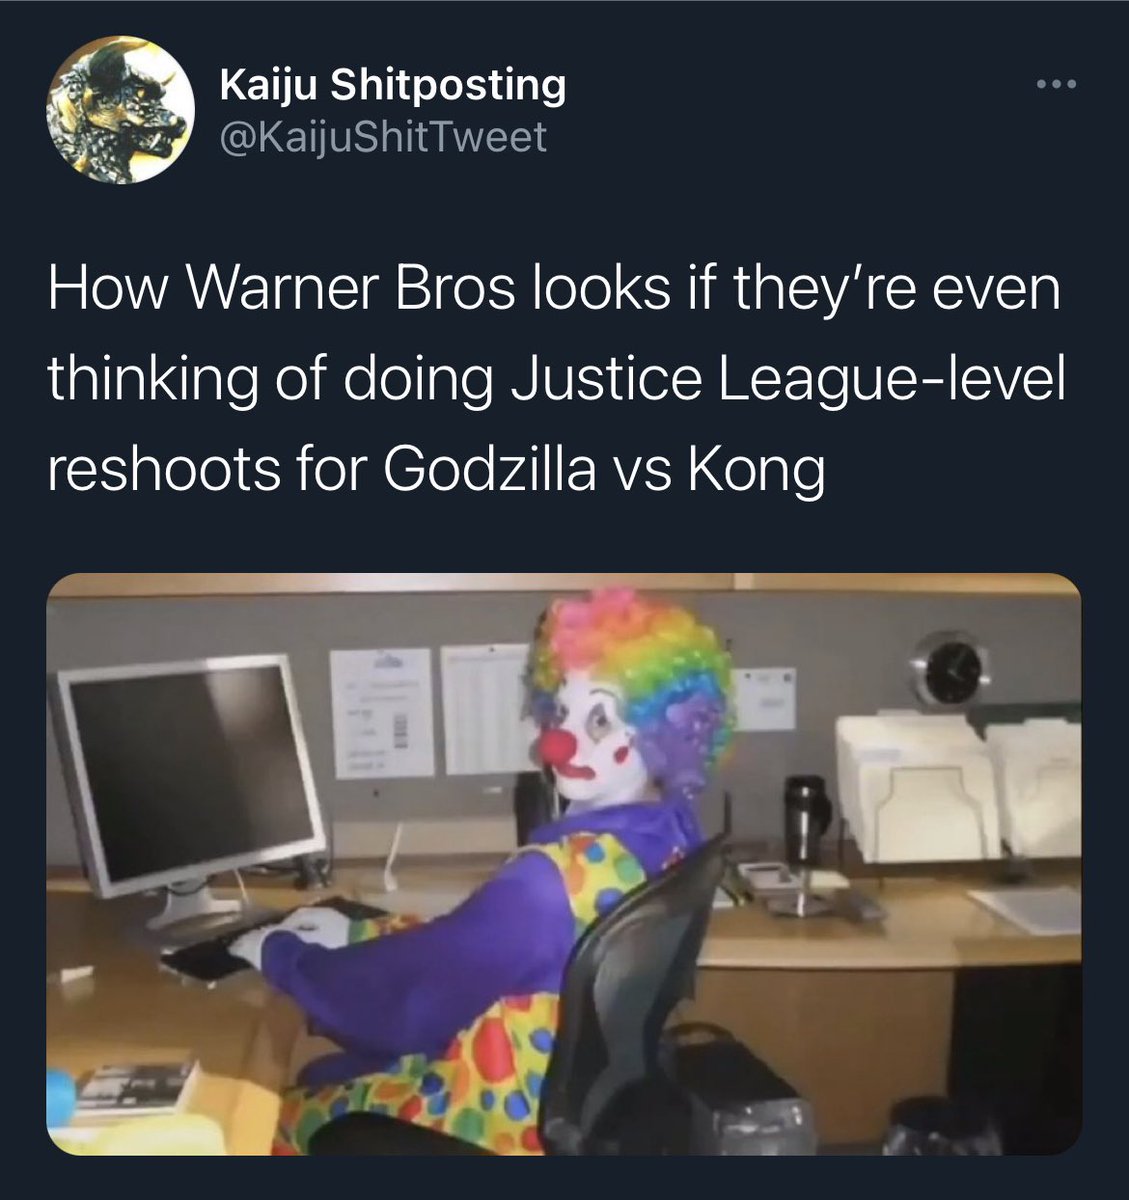 posts that aged well - presentation - Kaiju Shitposting ... How Warner Bros looks if they're even thinking of doing Justice Leaguelevel reshoots for Godzilla vs Kong